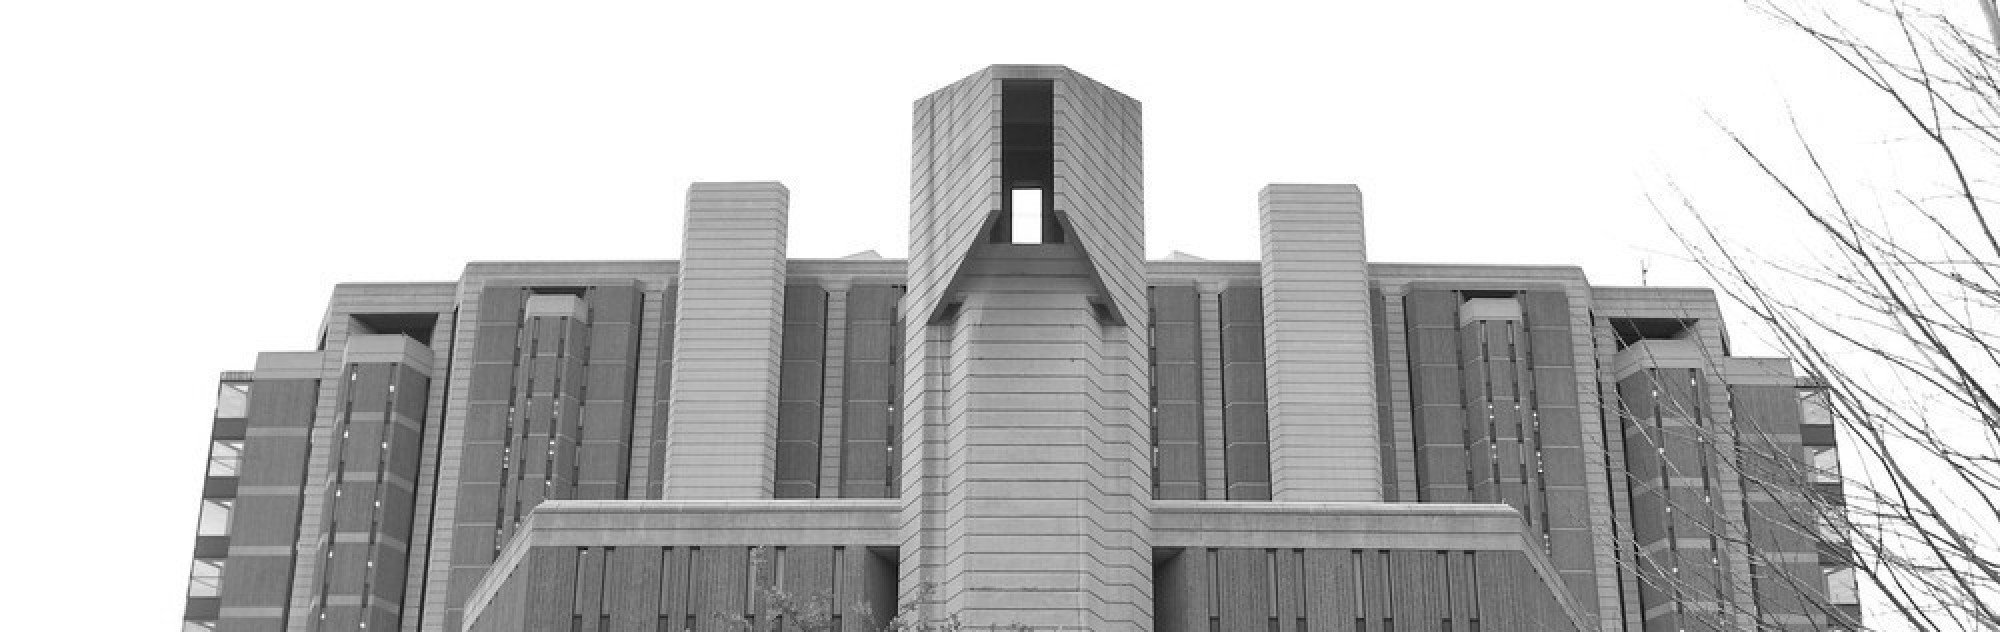 cropped-cropped-header-openrobarts1